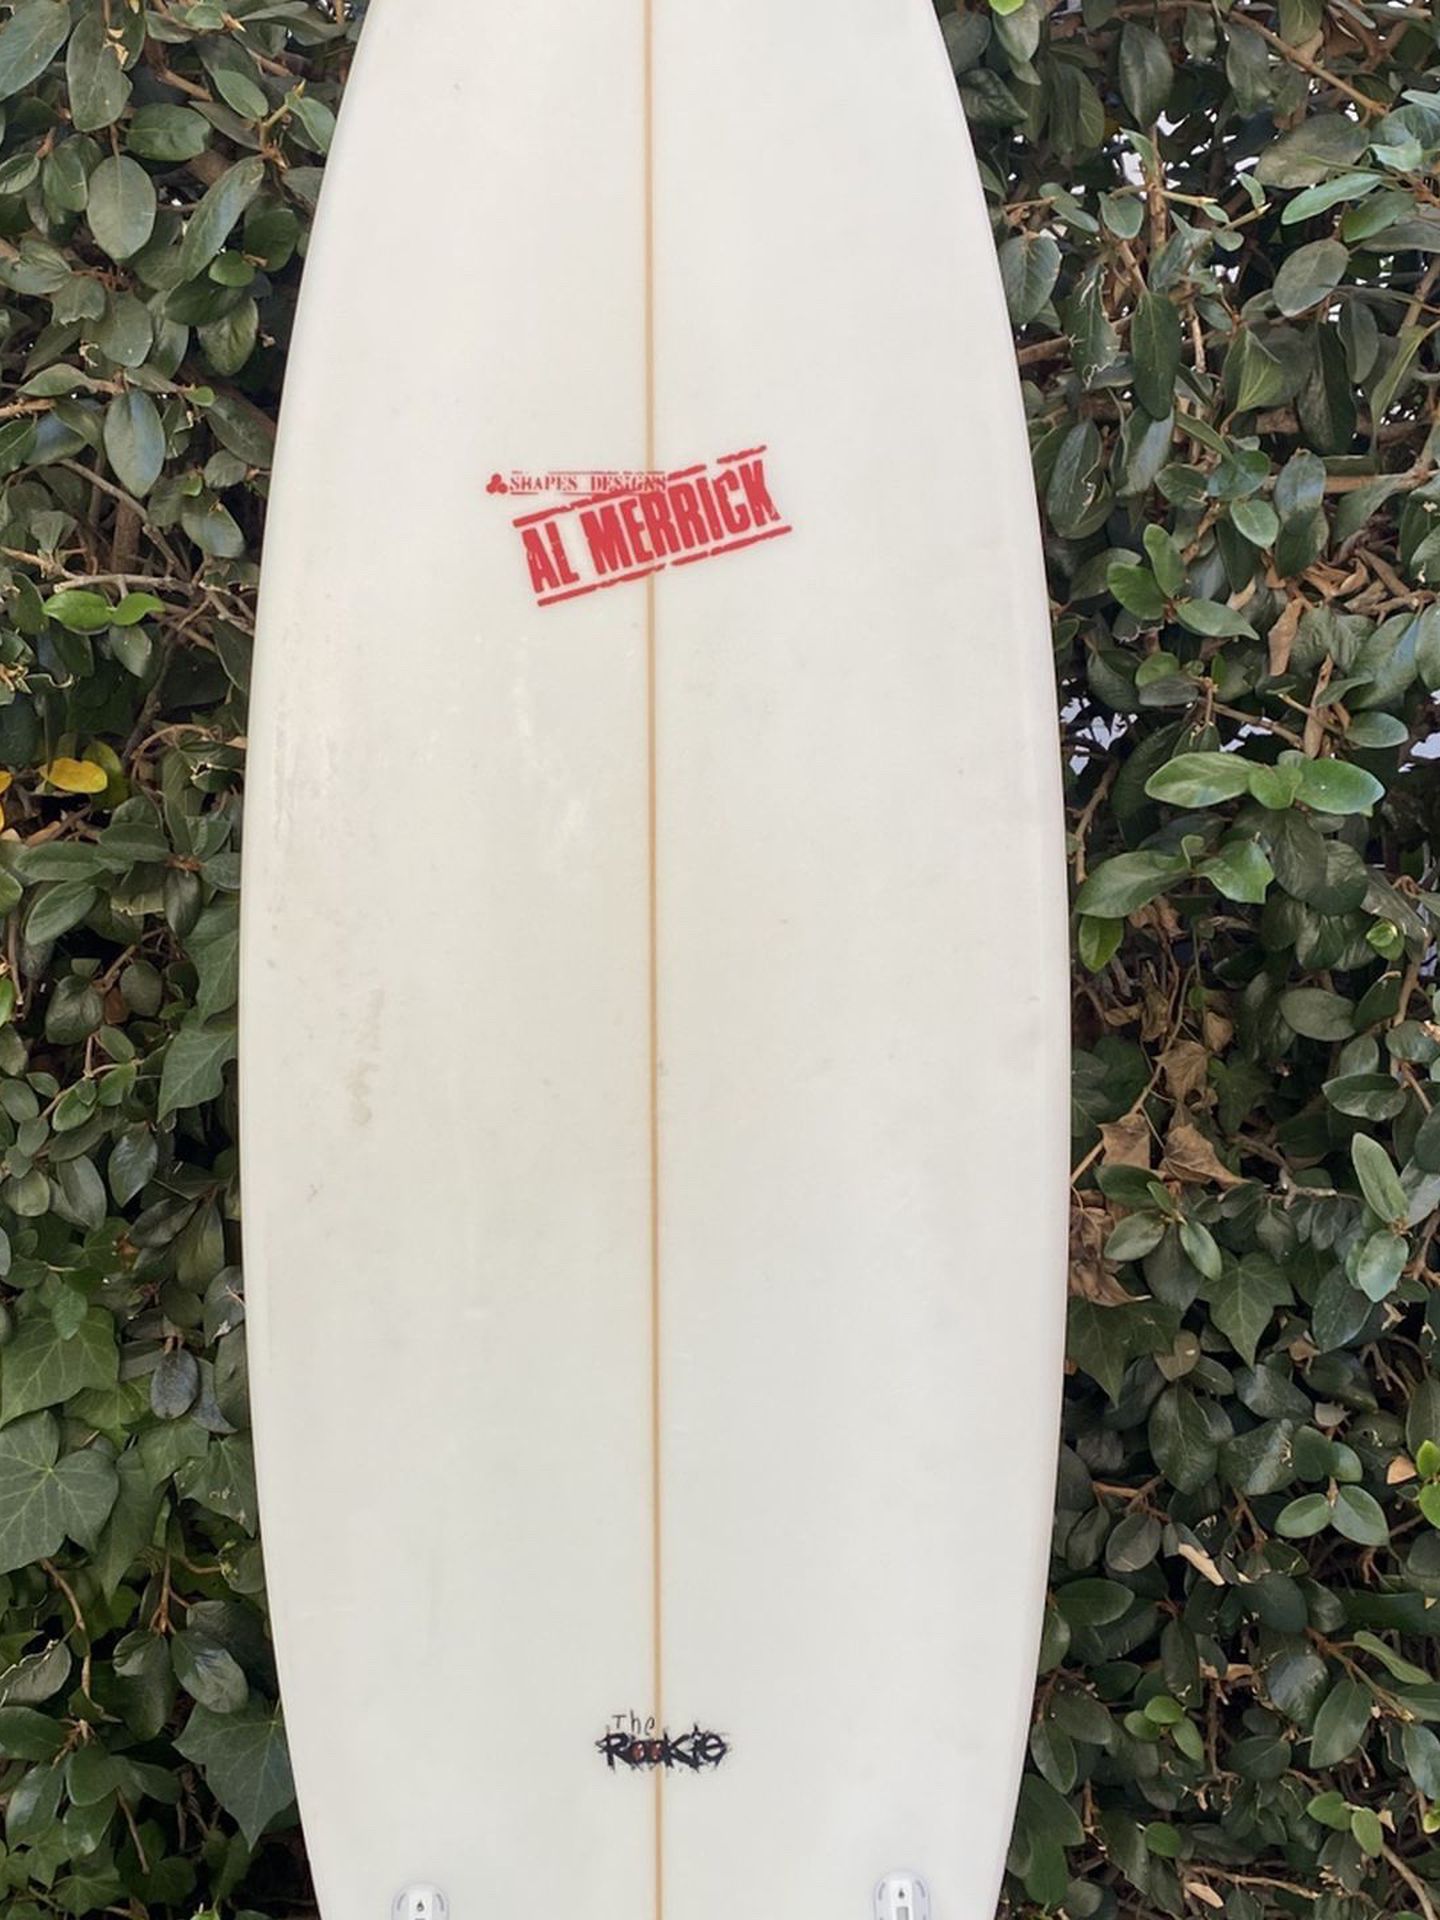 Channel Islands Rookie Surfboard —NEW -Barely Used